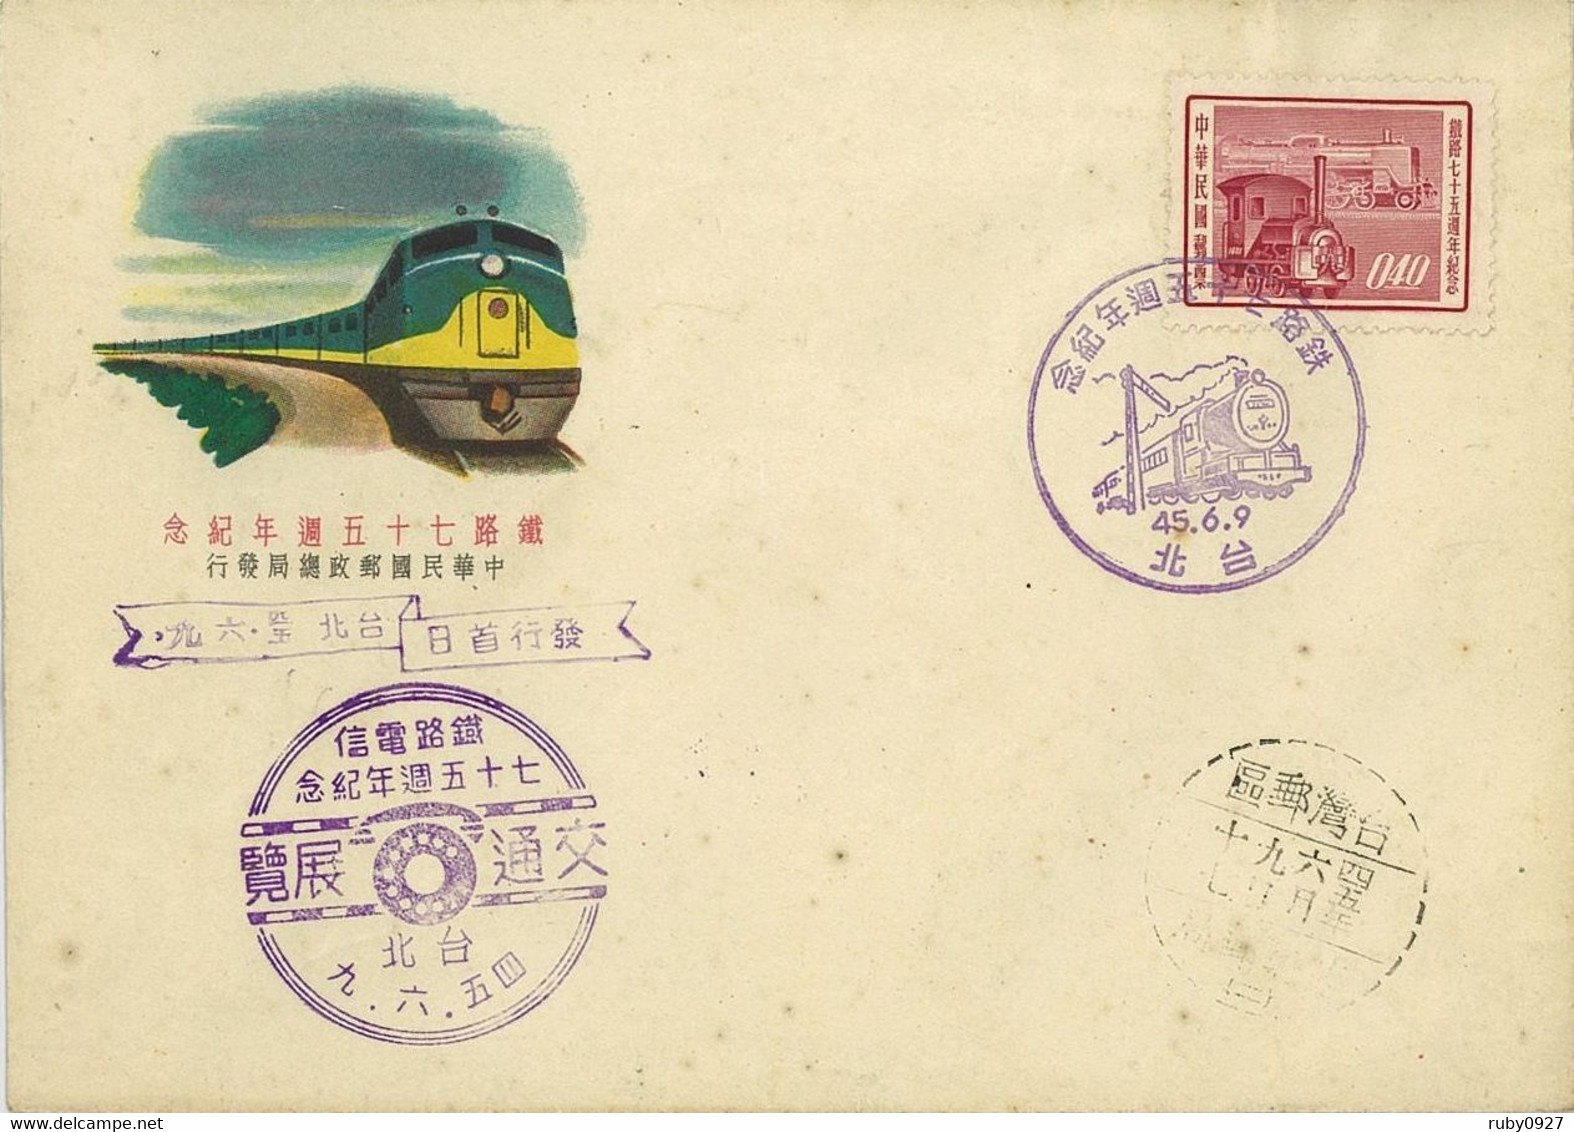 TAIWAN 1956 CHINA CHINESE RAILWAY 75TH ANNIVERSAIRY FIRST DAY COVER, TRAIN, TRAINS, LOCOMOTIVE, TRANSPORT - Cartas & Documentos